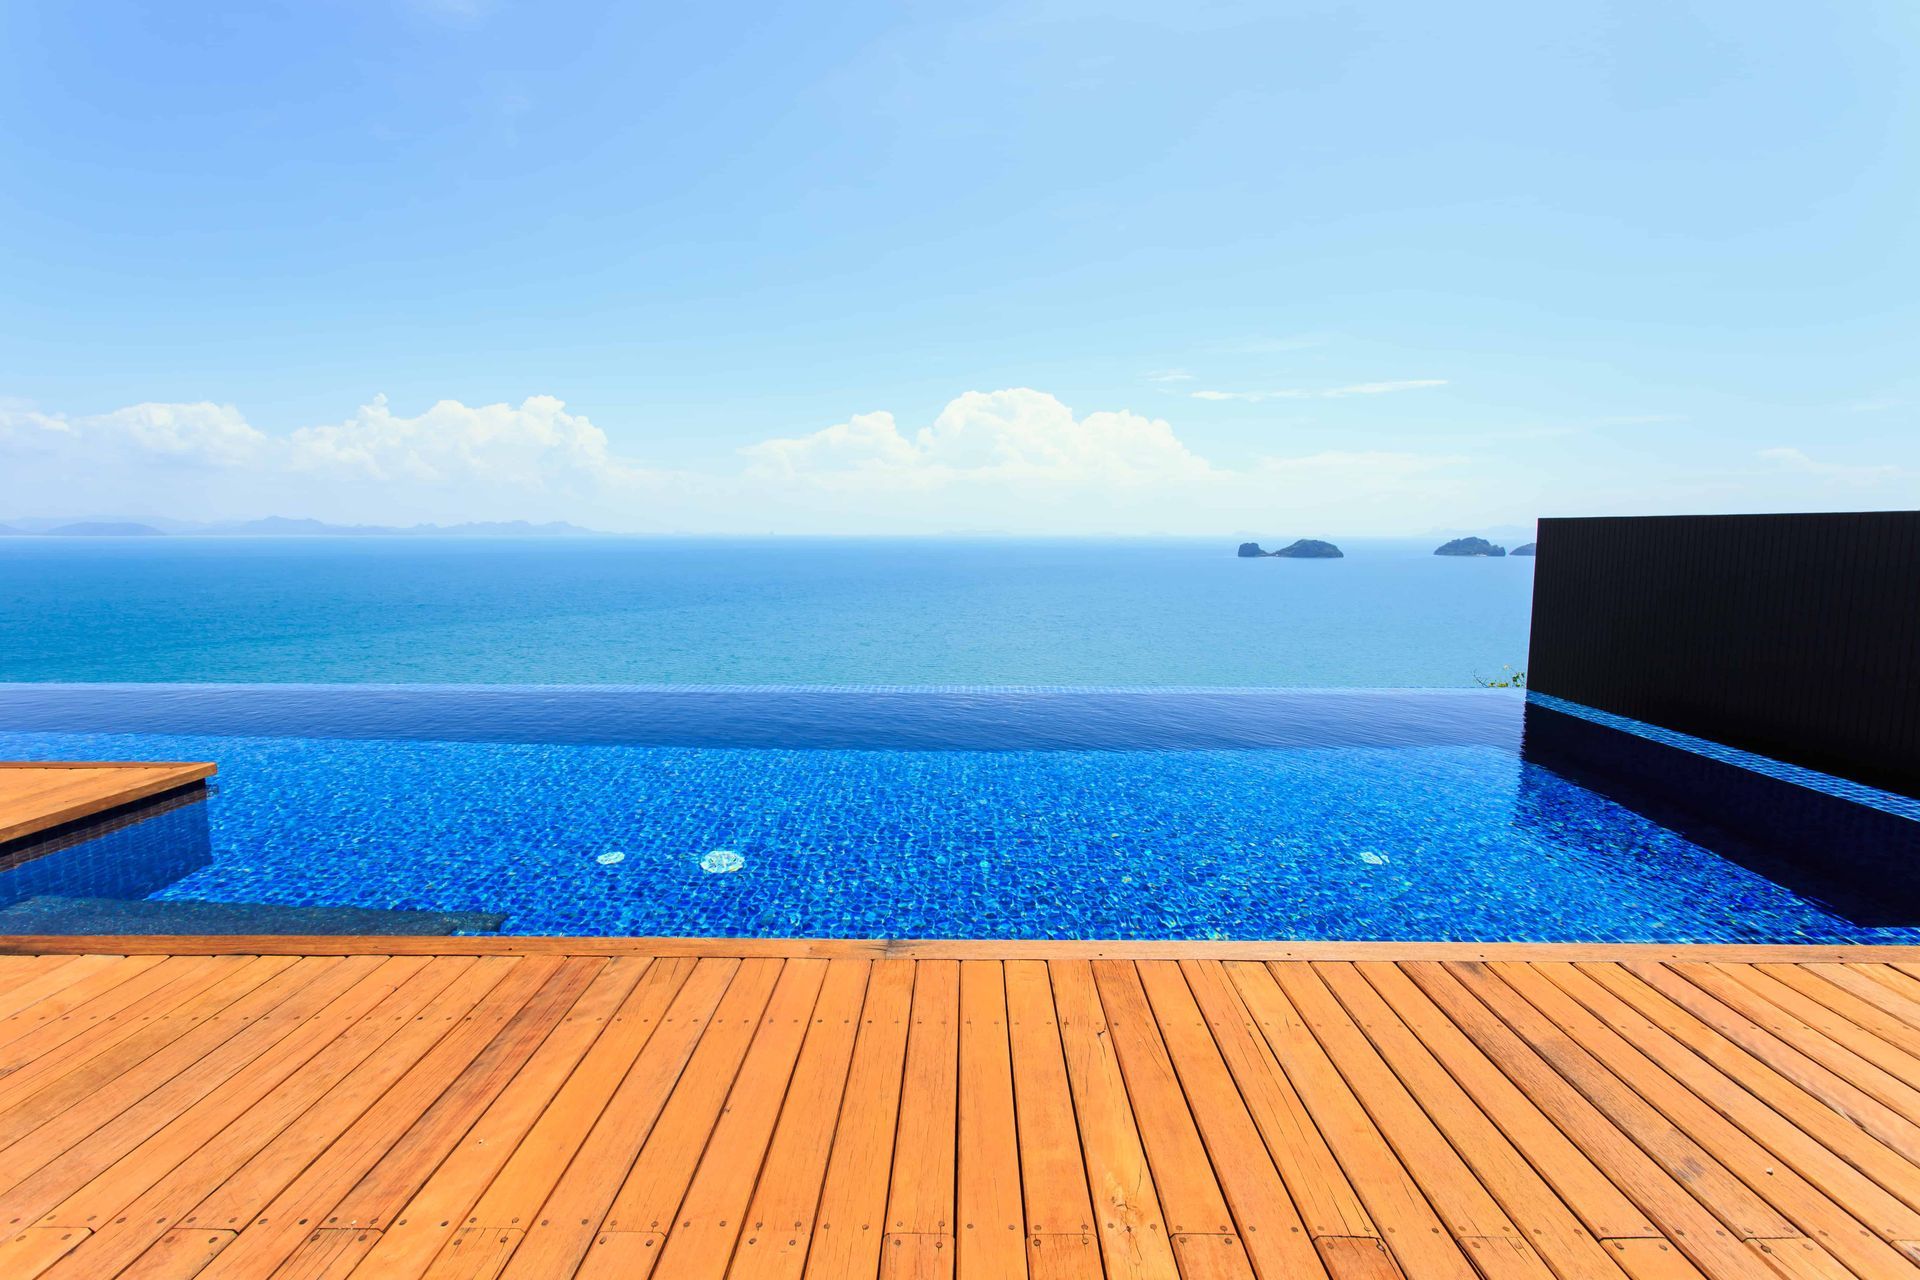 An infinity pool with a wooden deck